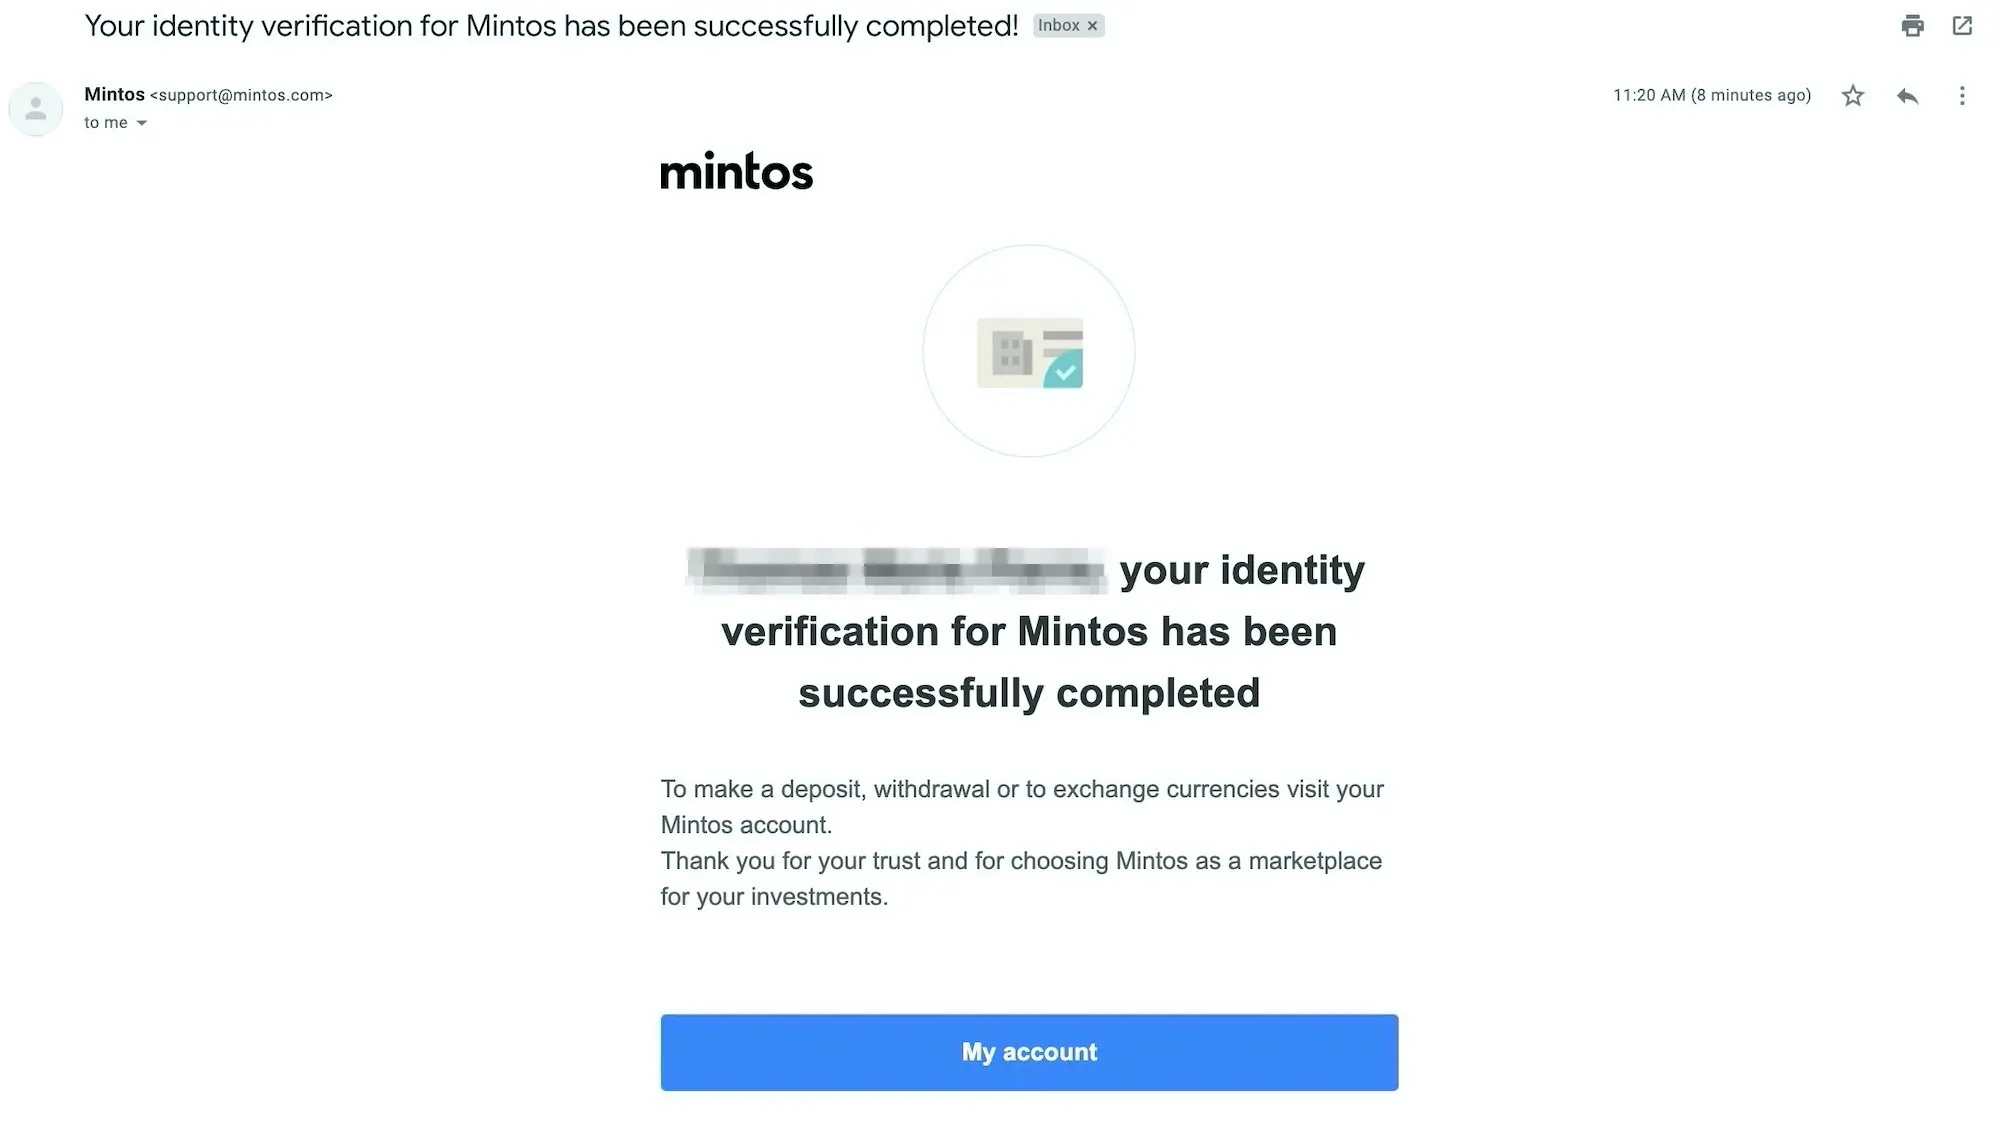 In the next few hours or even the next day, you will receive an email telling you that your identity has been verified. You can now click on 'My account' to continue with the next step